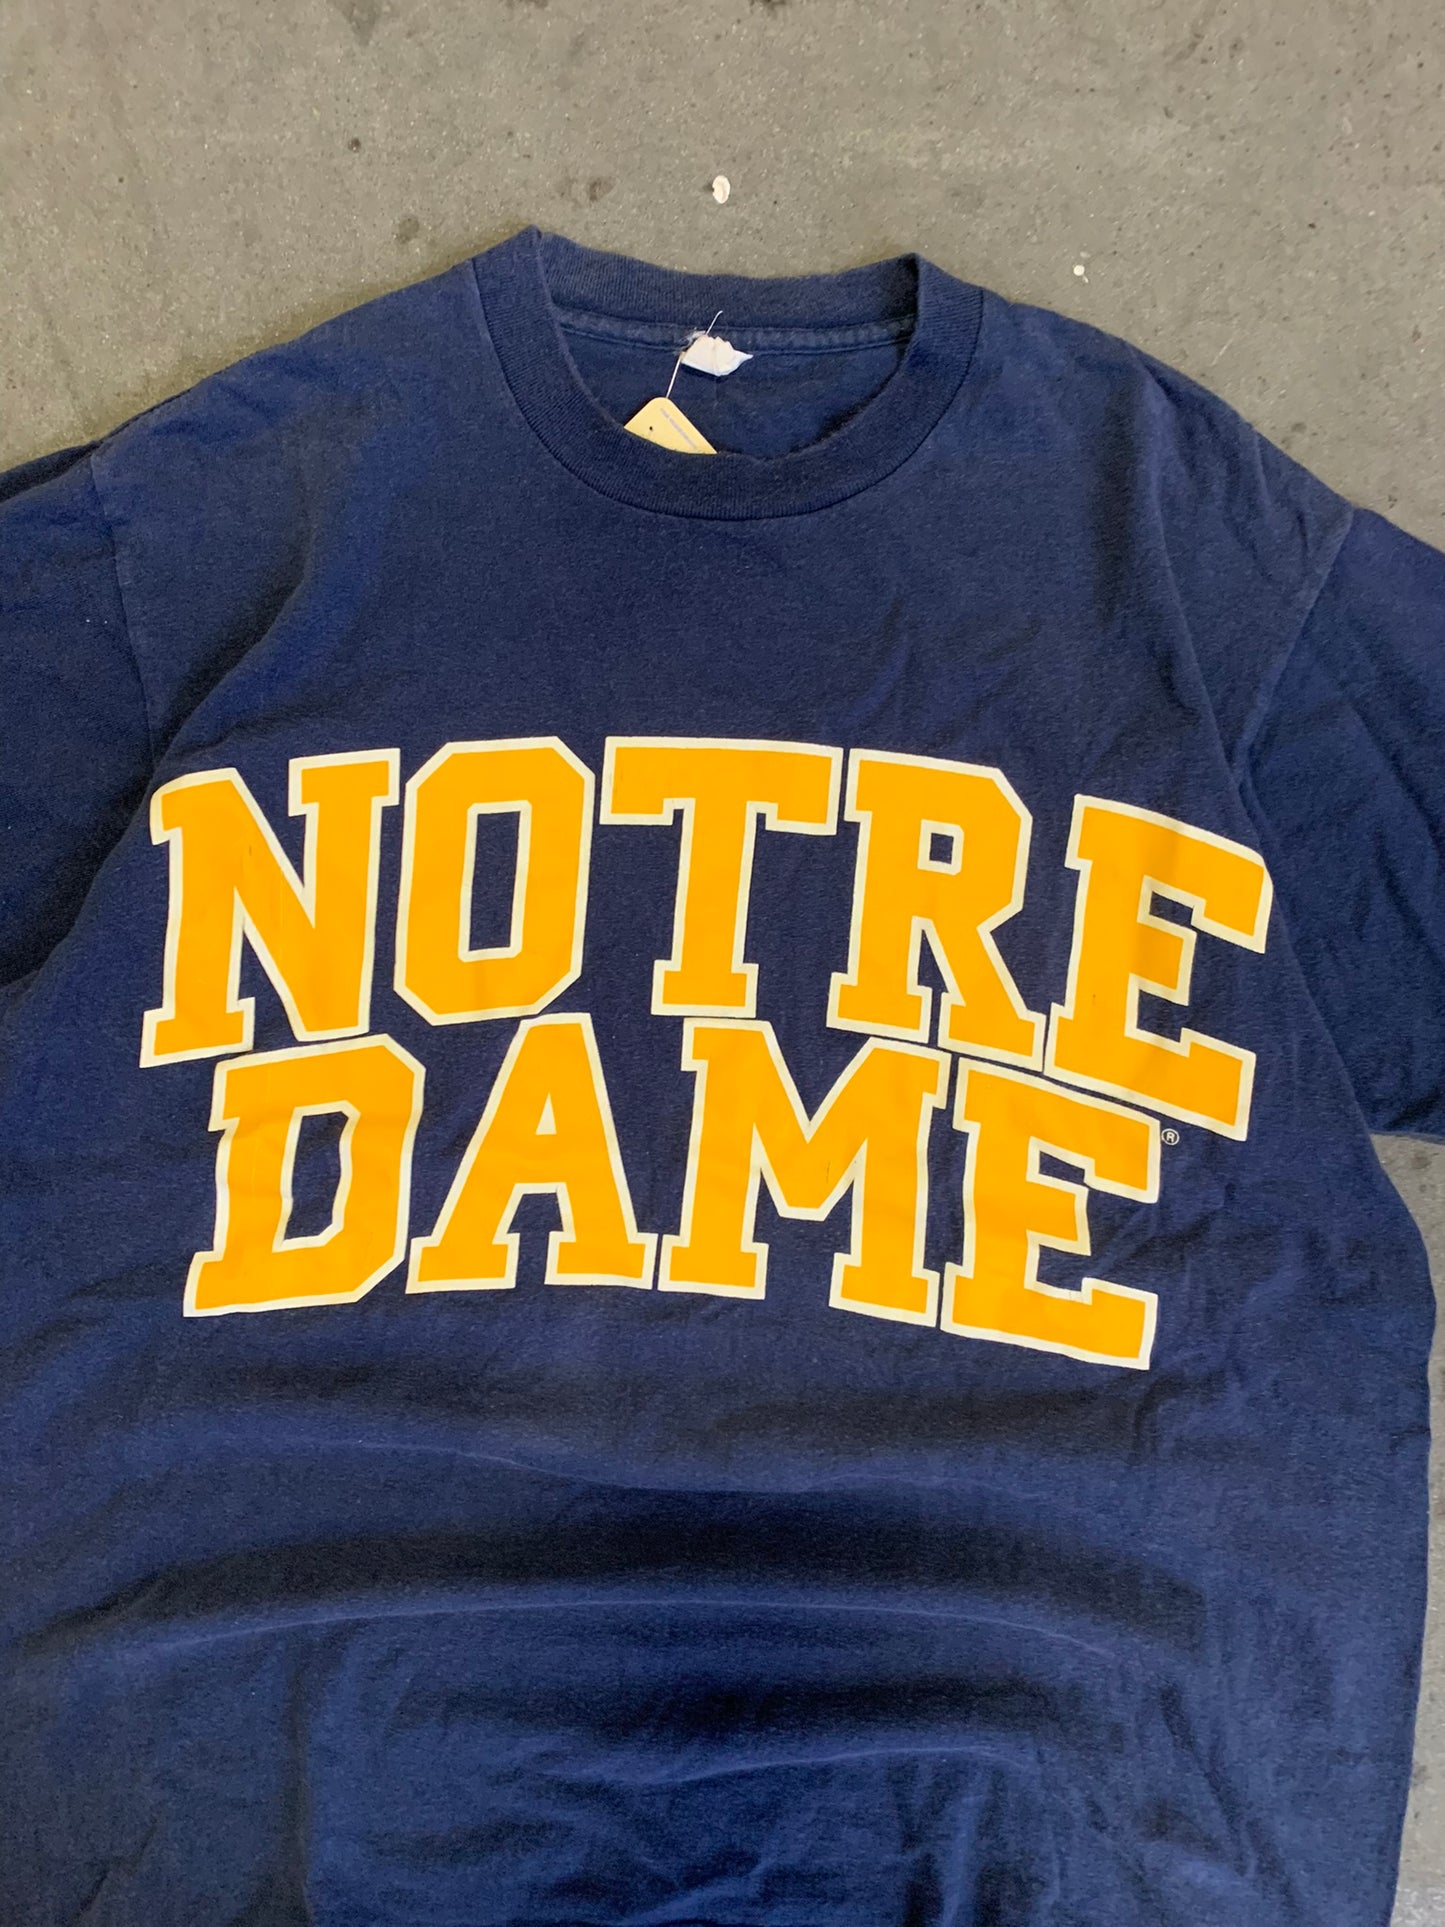 (M) 90’s Notre Dame Tee